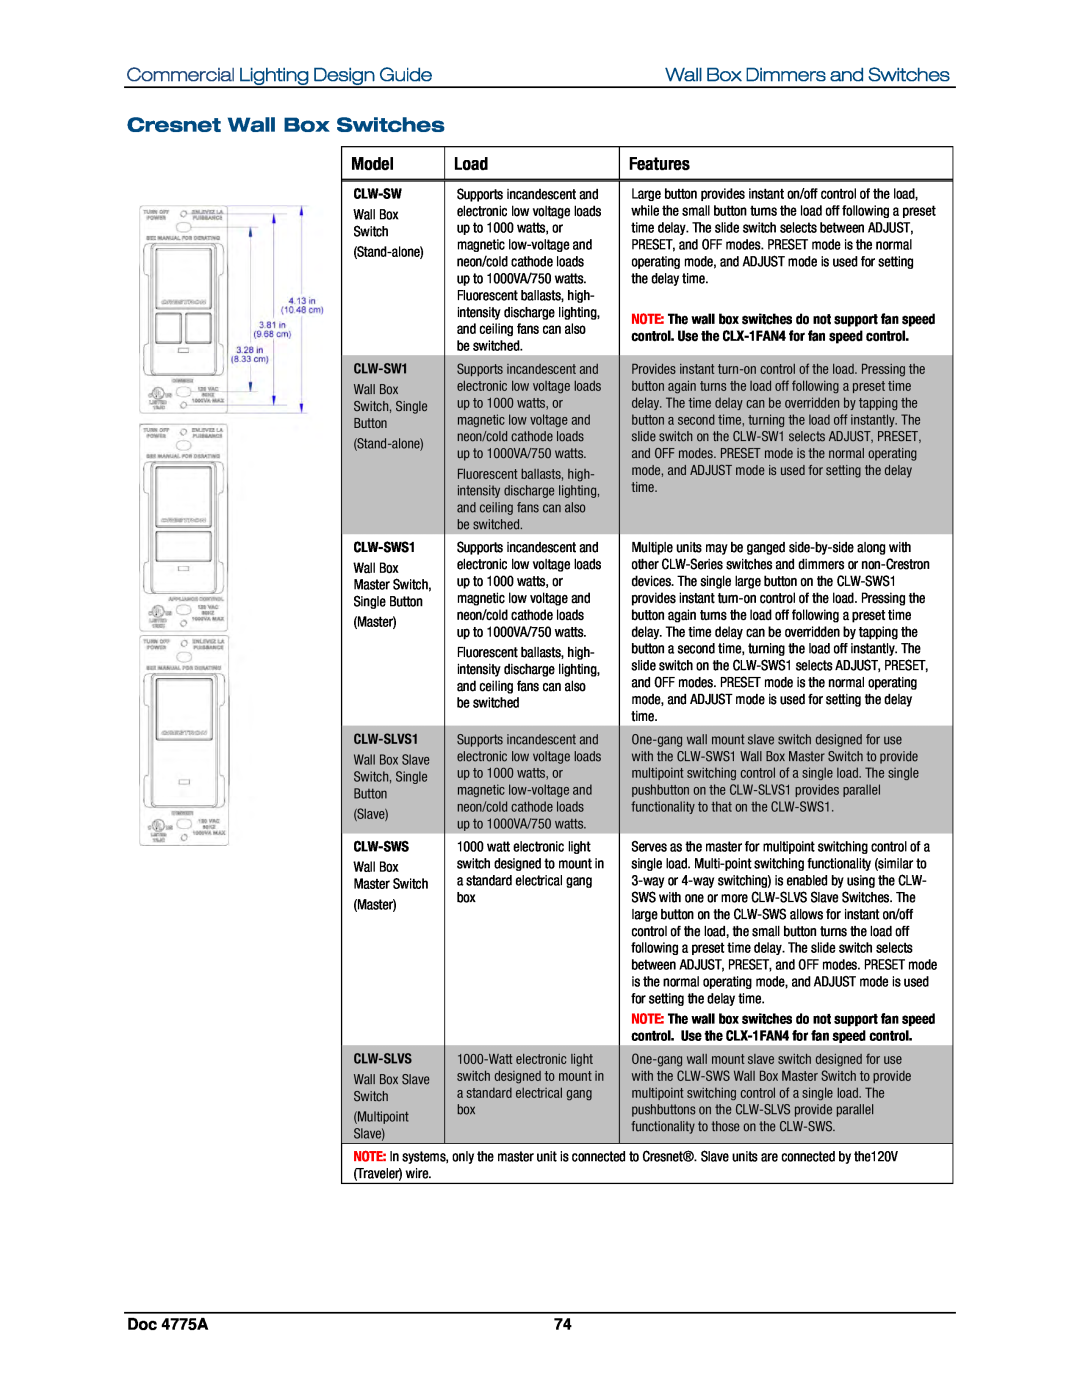 Crestron electronic IPAC-GL1 Cresnet Wall Box Switches, Commercial Lighting Design Guide, Wall Box Dimmers and Switches 